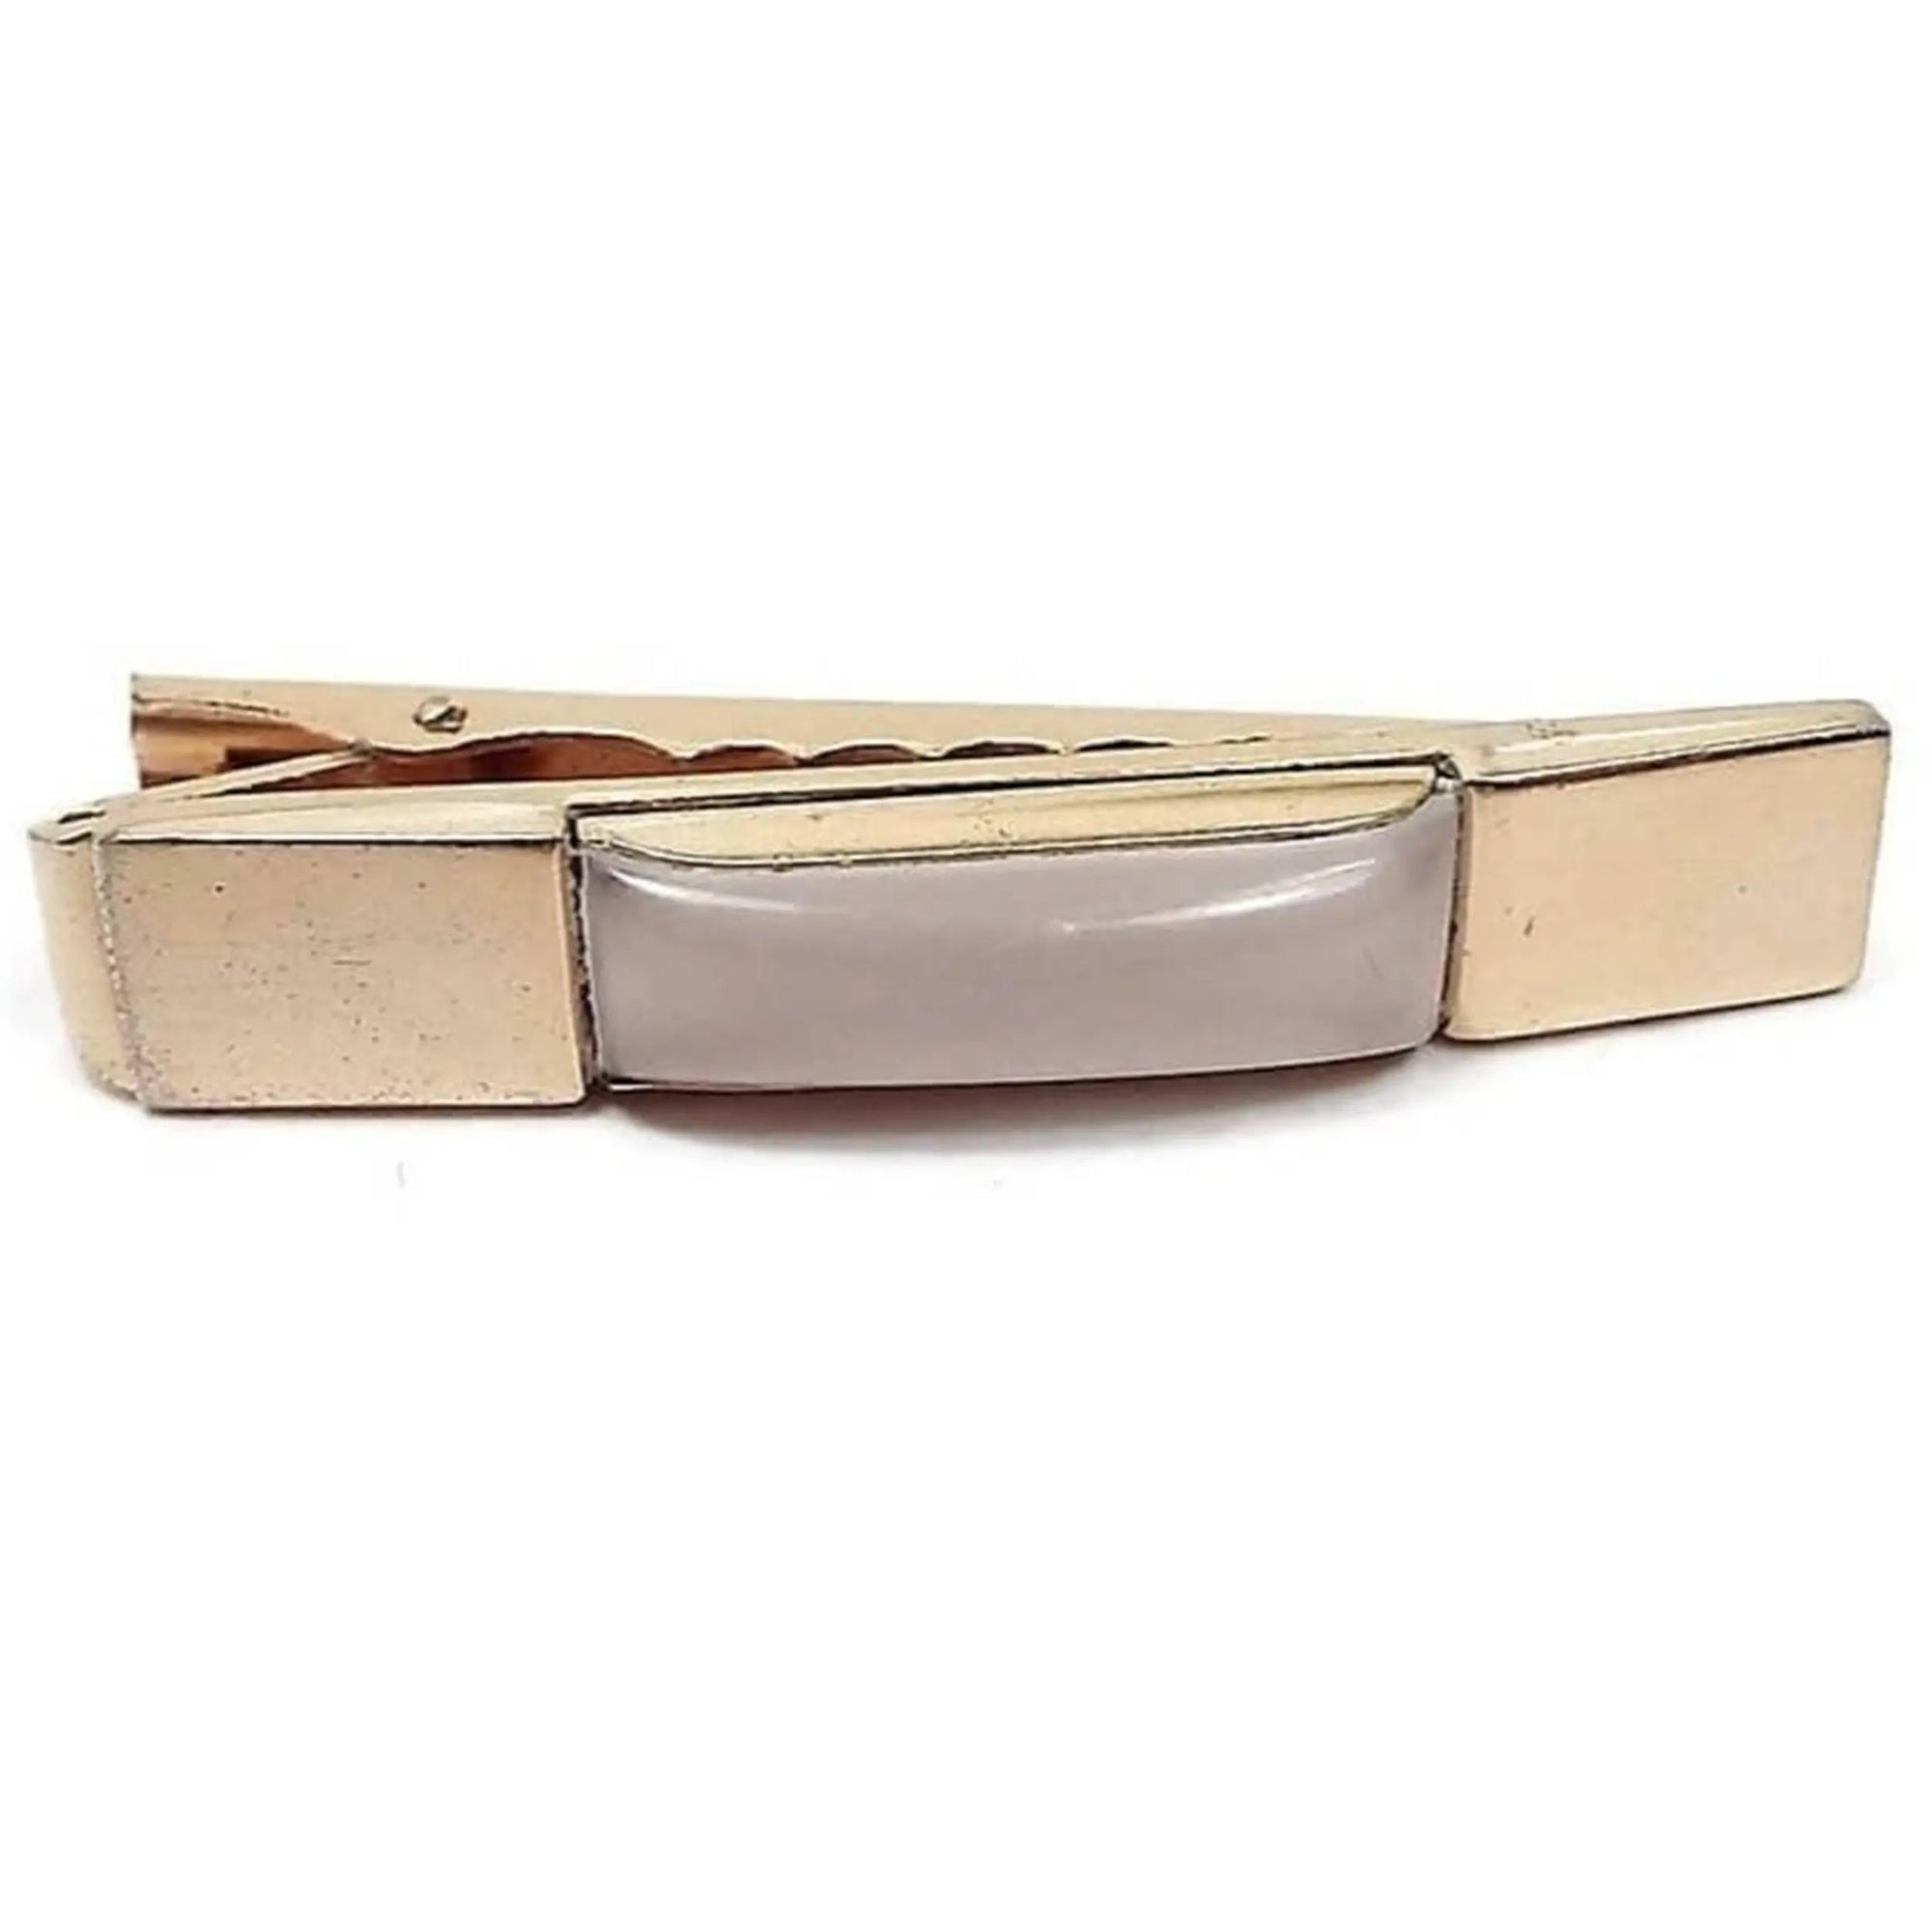 Front view of the Mid Century Anson tie clip. It has a rectangle shape with a puffy rectangle lucite plastic cab in the middle. The lucite is pearly white and slightly translucent in color. There is a large wide alligator style clip on the back.